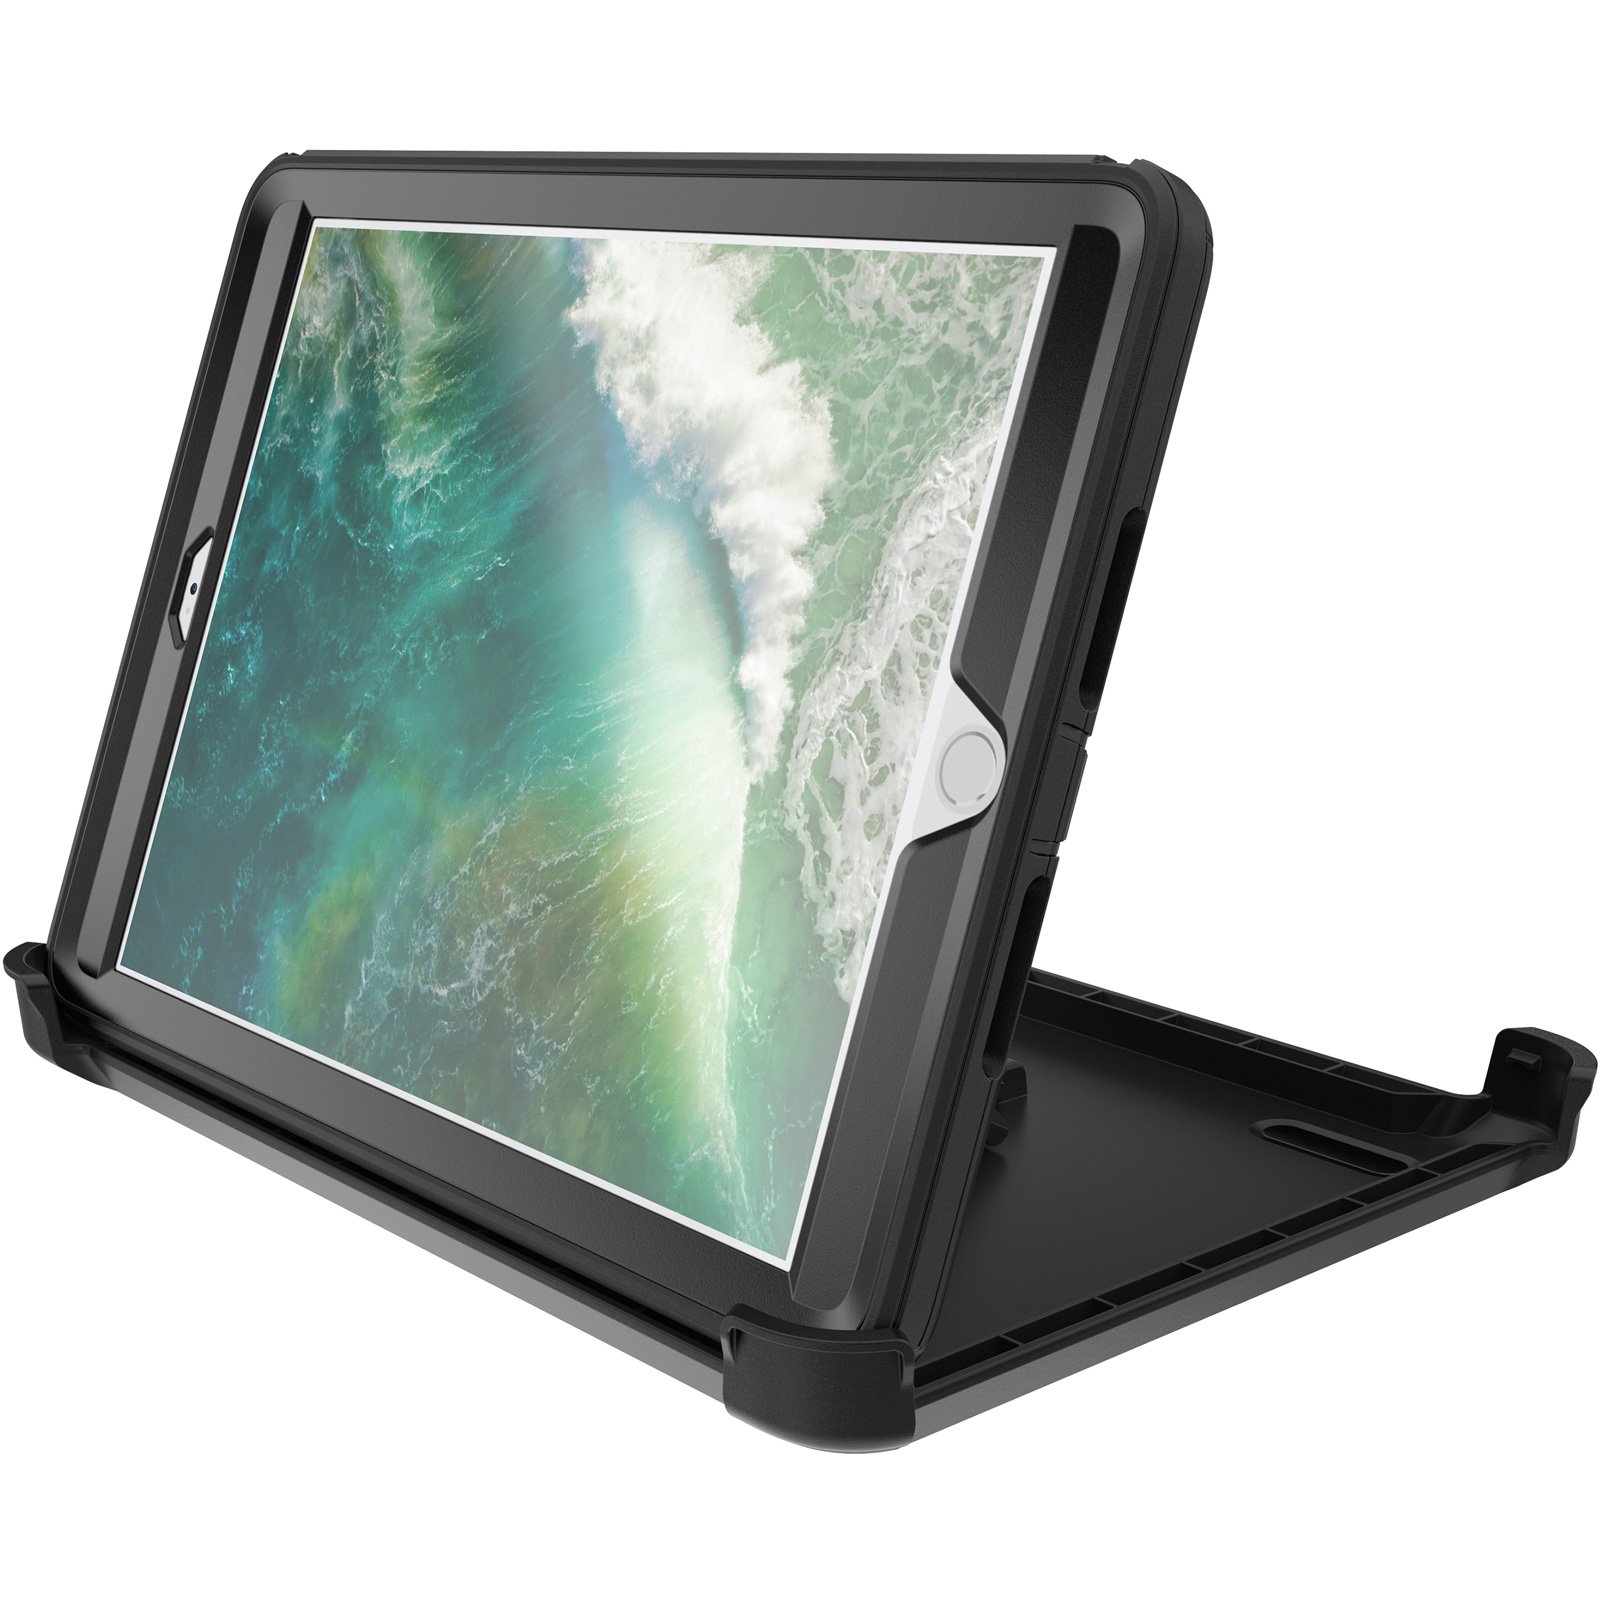 Rugged iPad (5th and 6th gen) Case